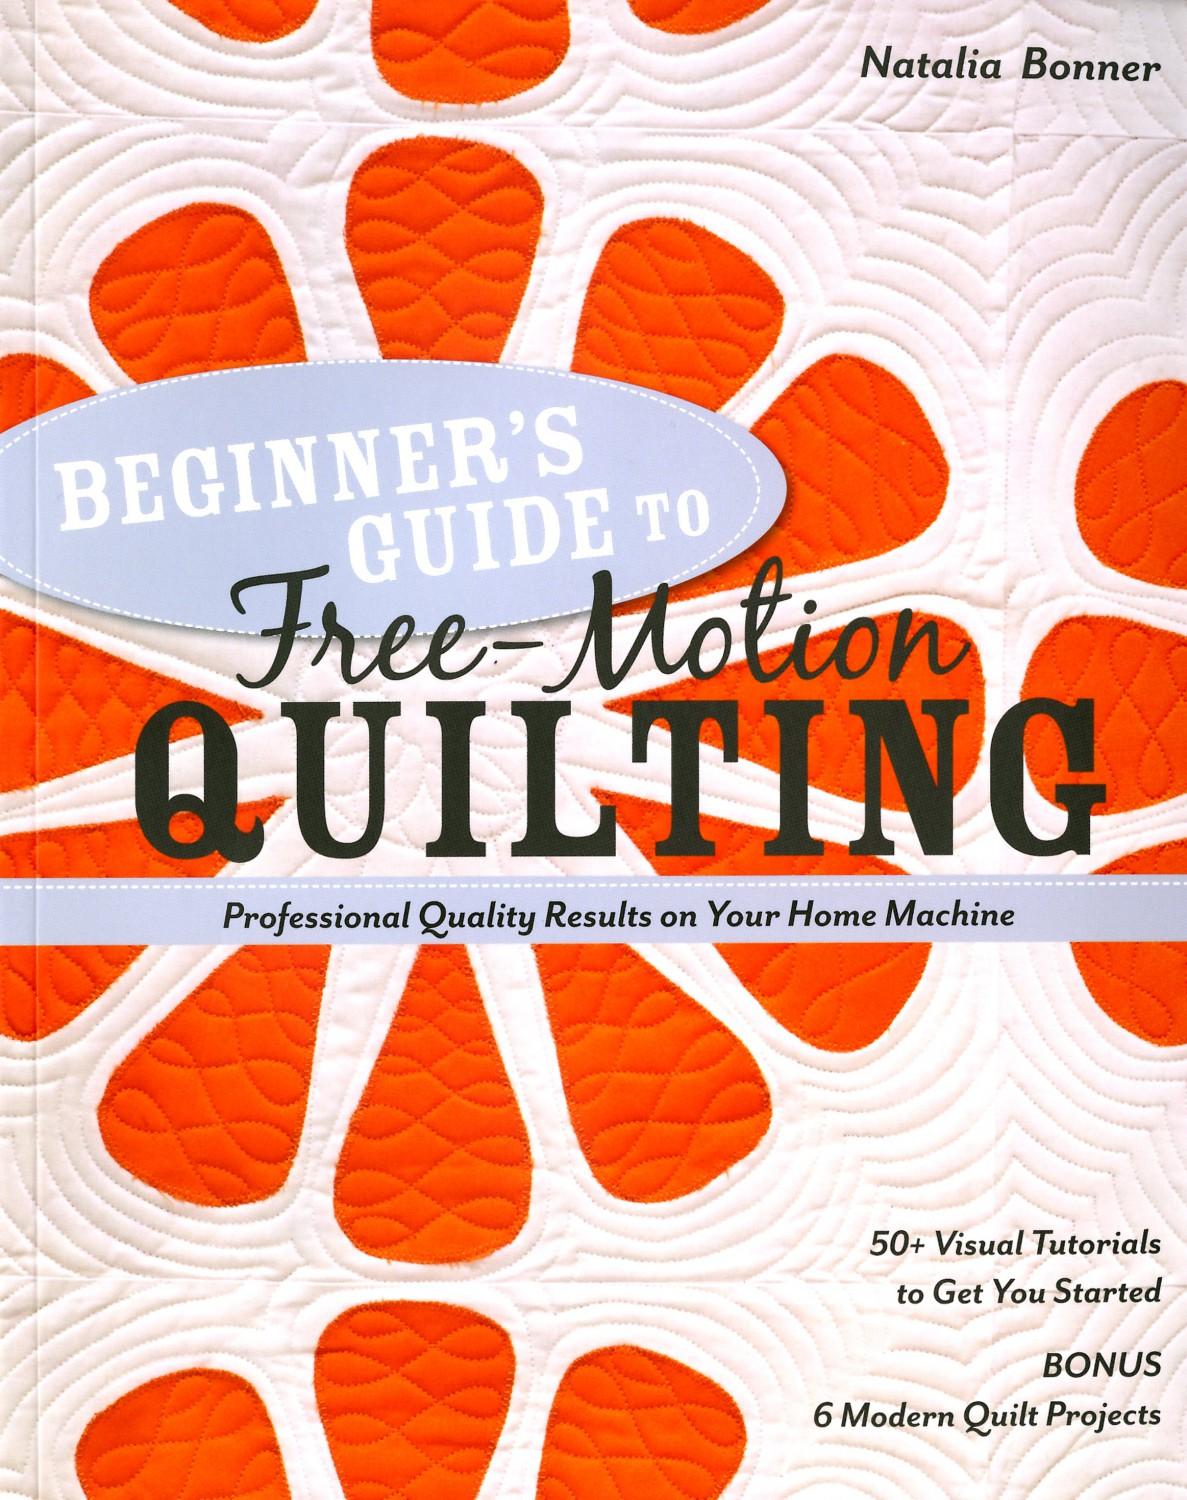 This book will provide professional quality results using your home machine. There are 50 plus Visual Tutorials to get you started with 6 Modern Quilt Projects included as a BONUS!